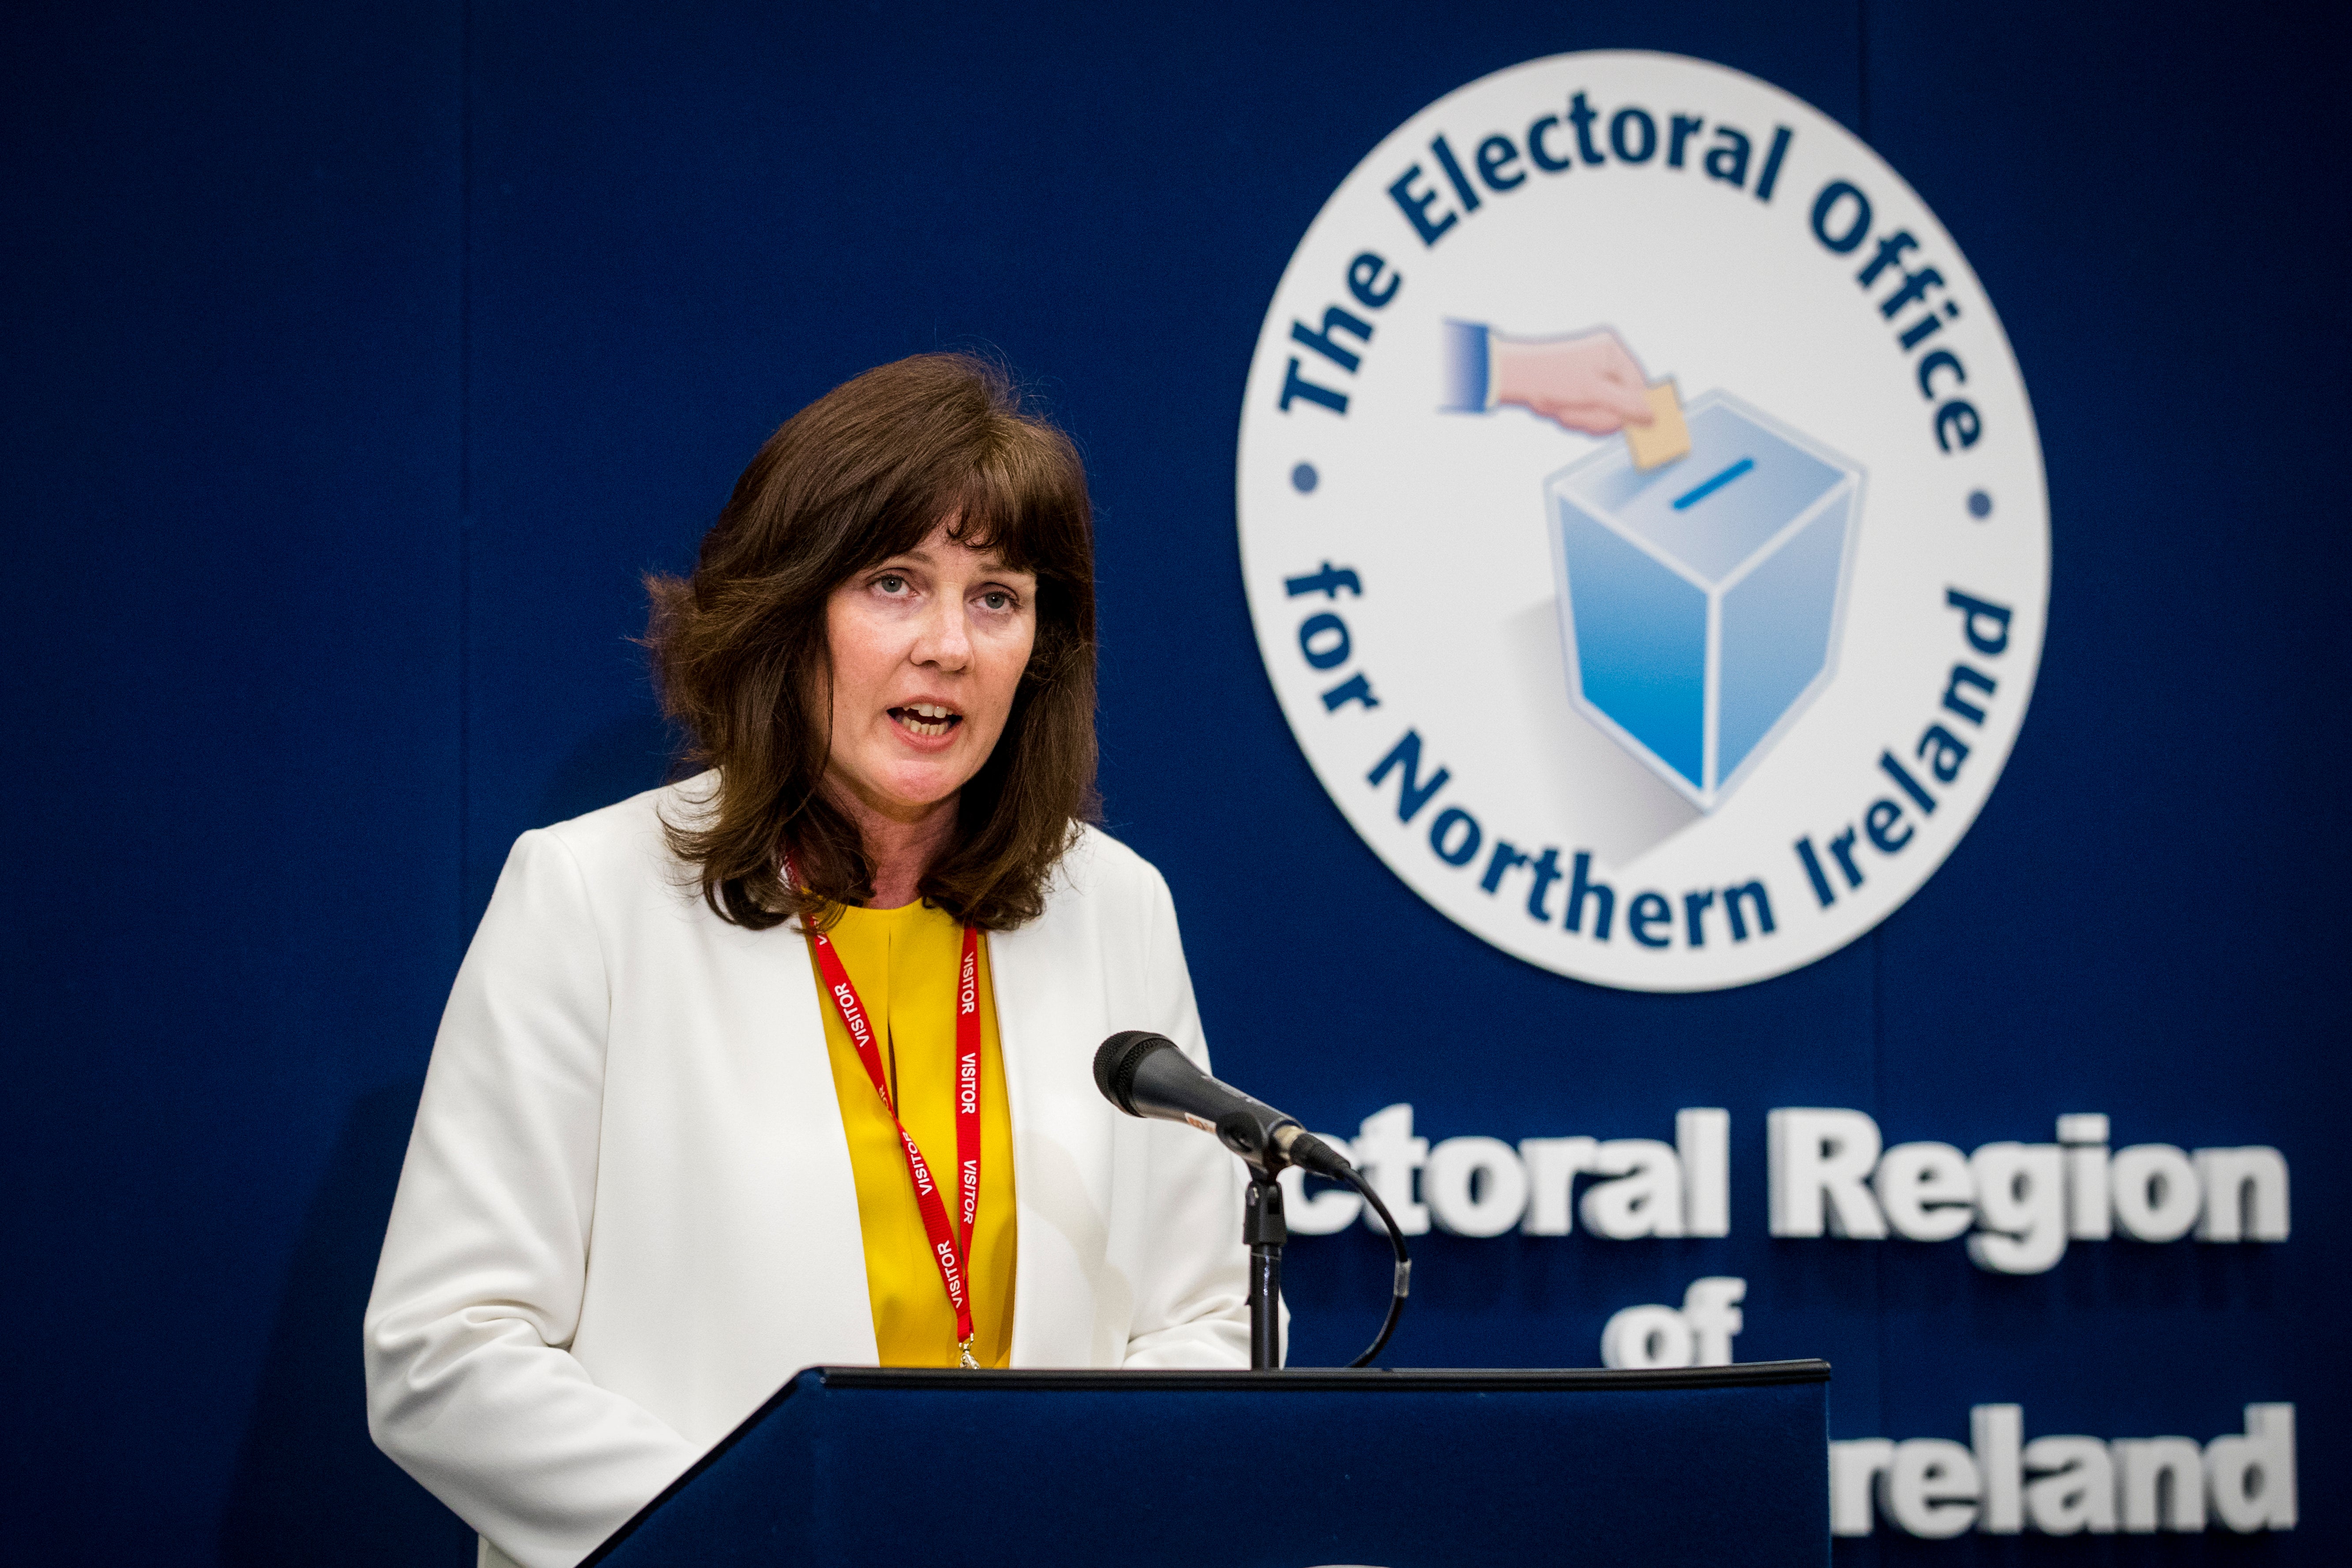 Chief electoral officer Virginia McVea advised voters to wear masks (PA)